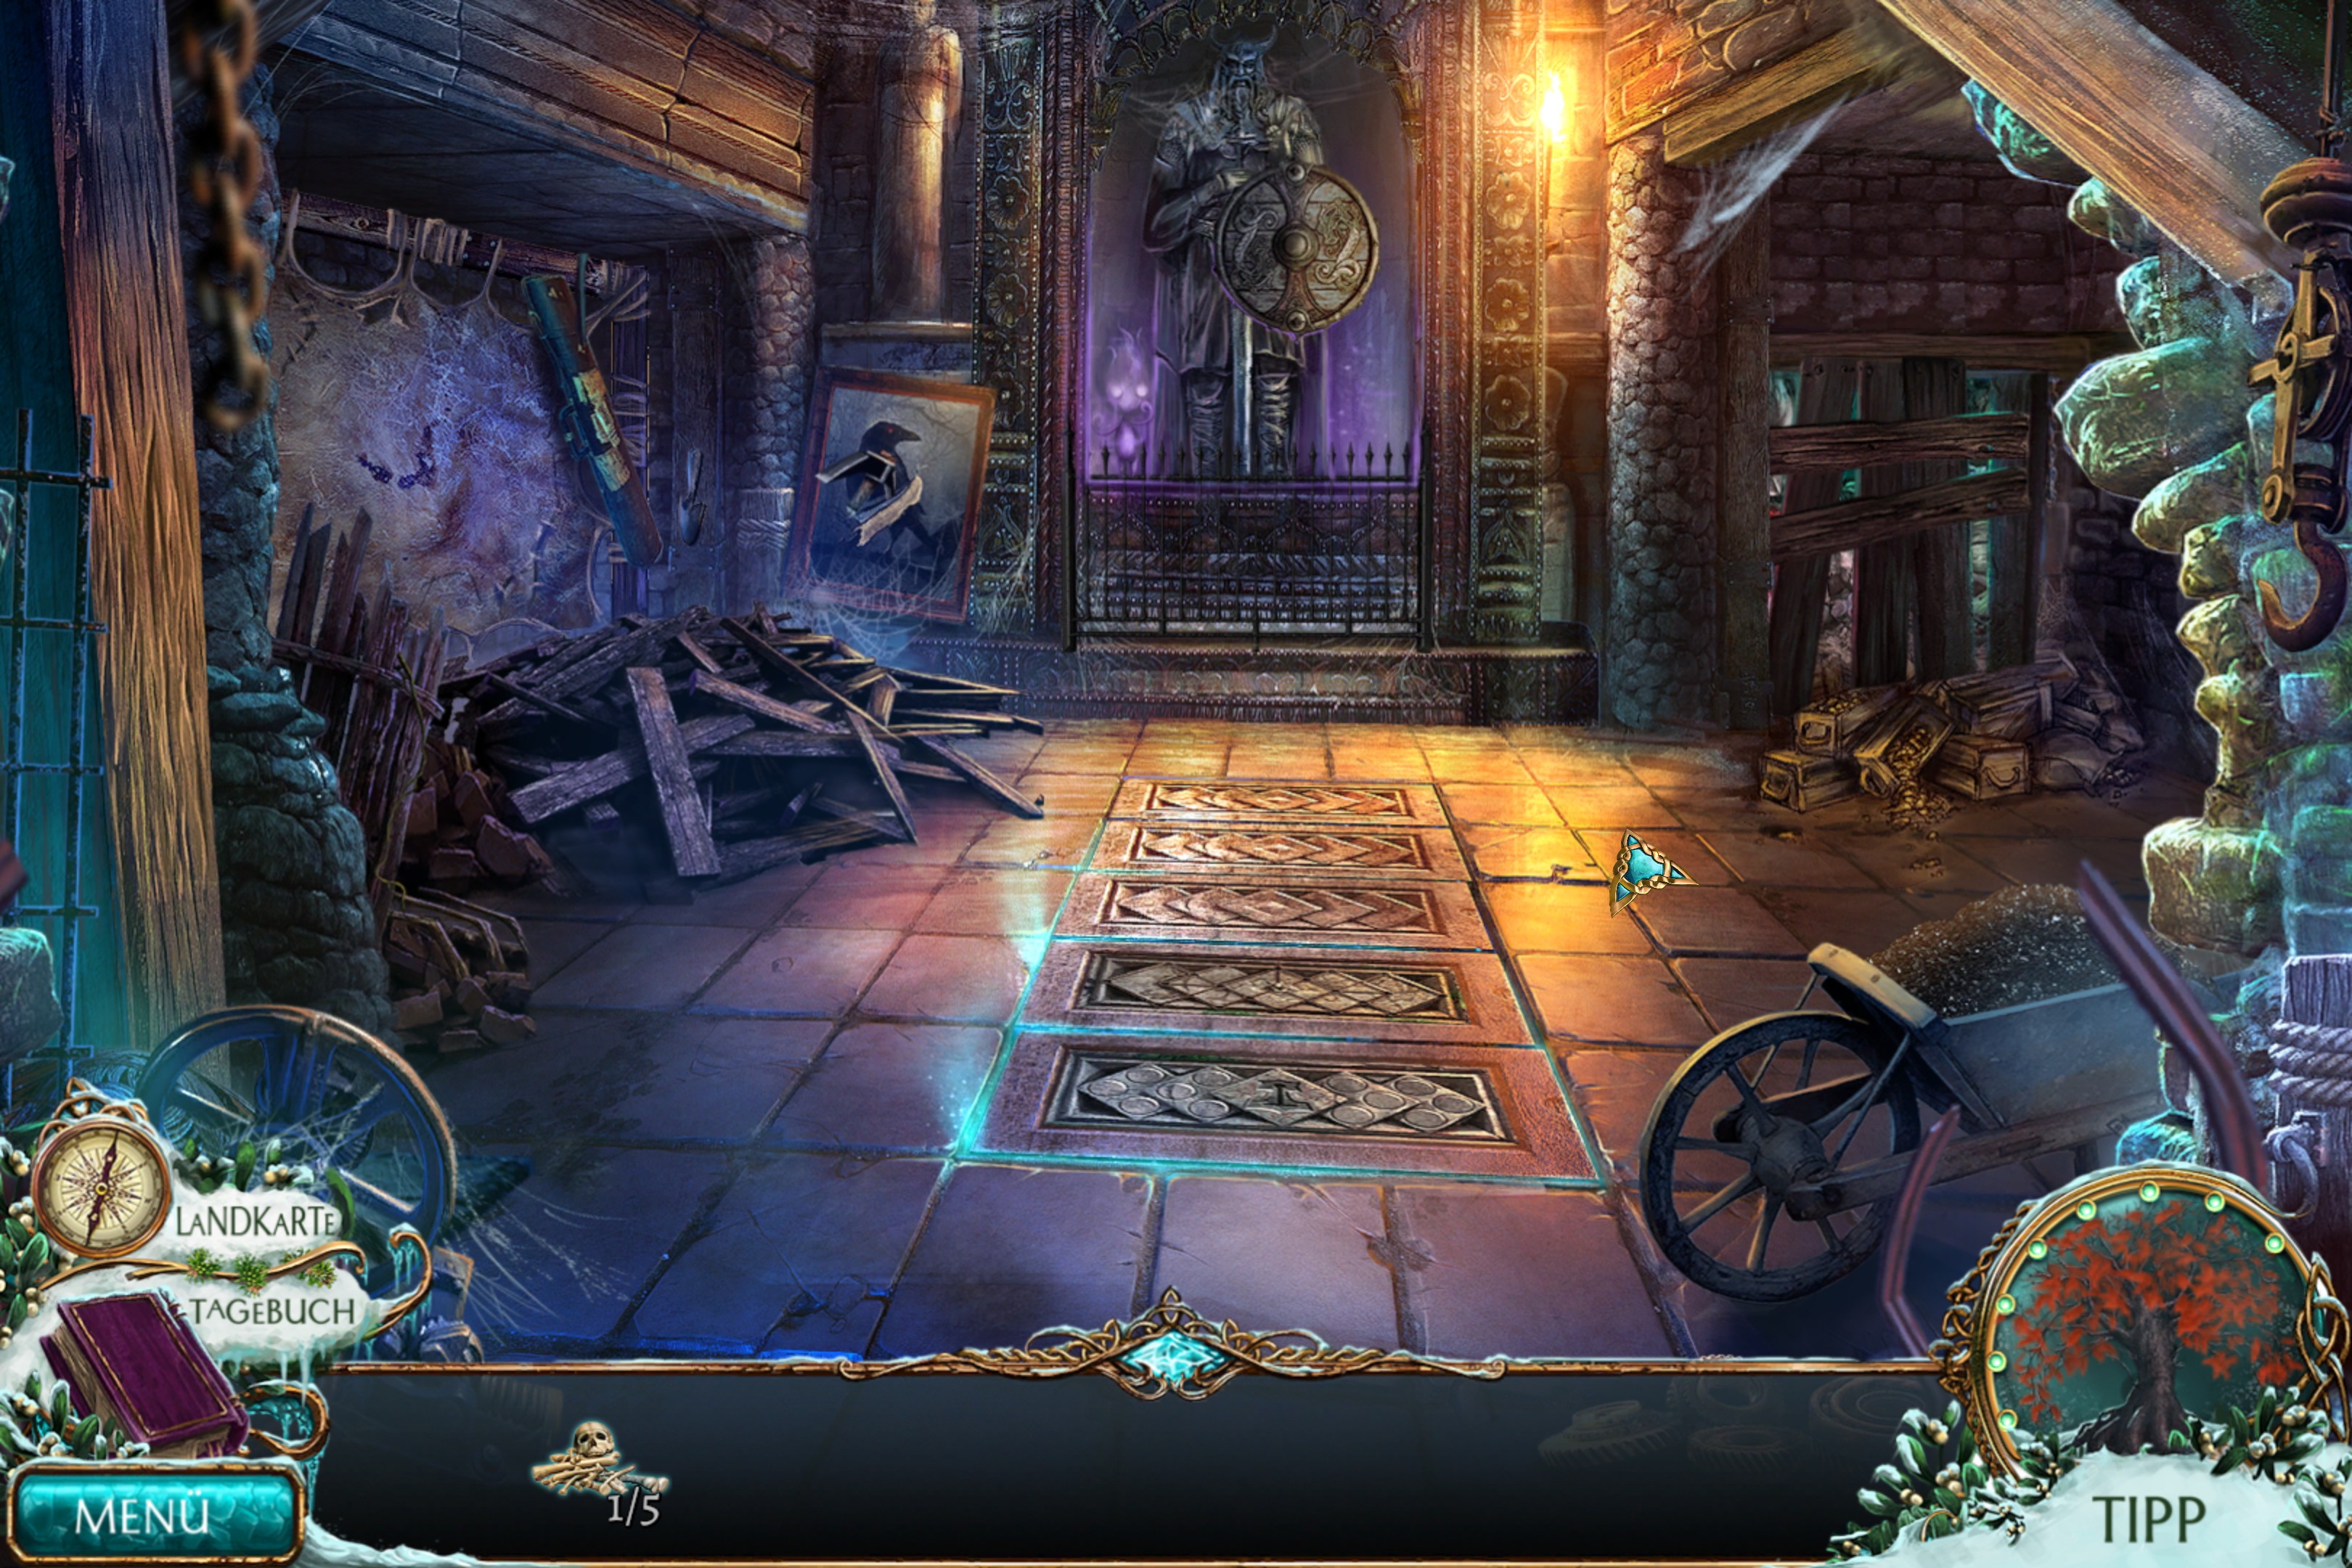 download the new for windows Endless Fables 2: Frozen Path